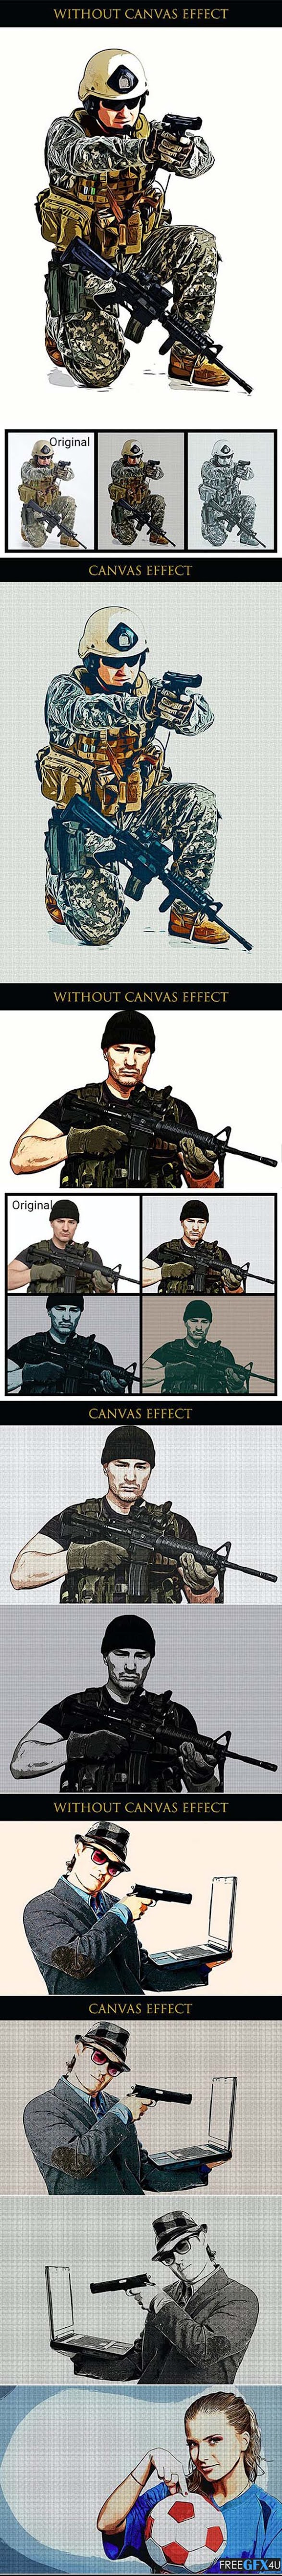 Vector Canvas Art Painting Photoshop Action